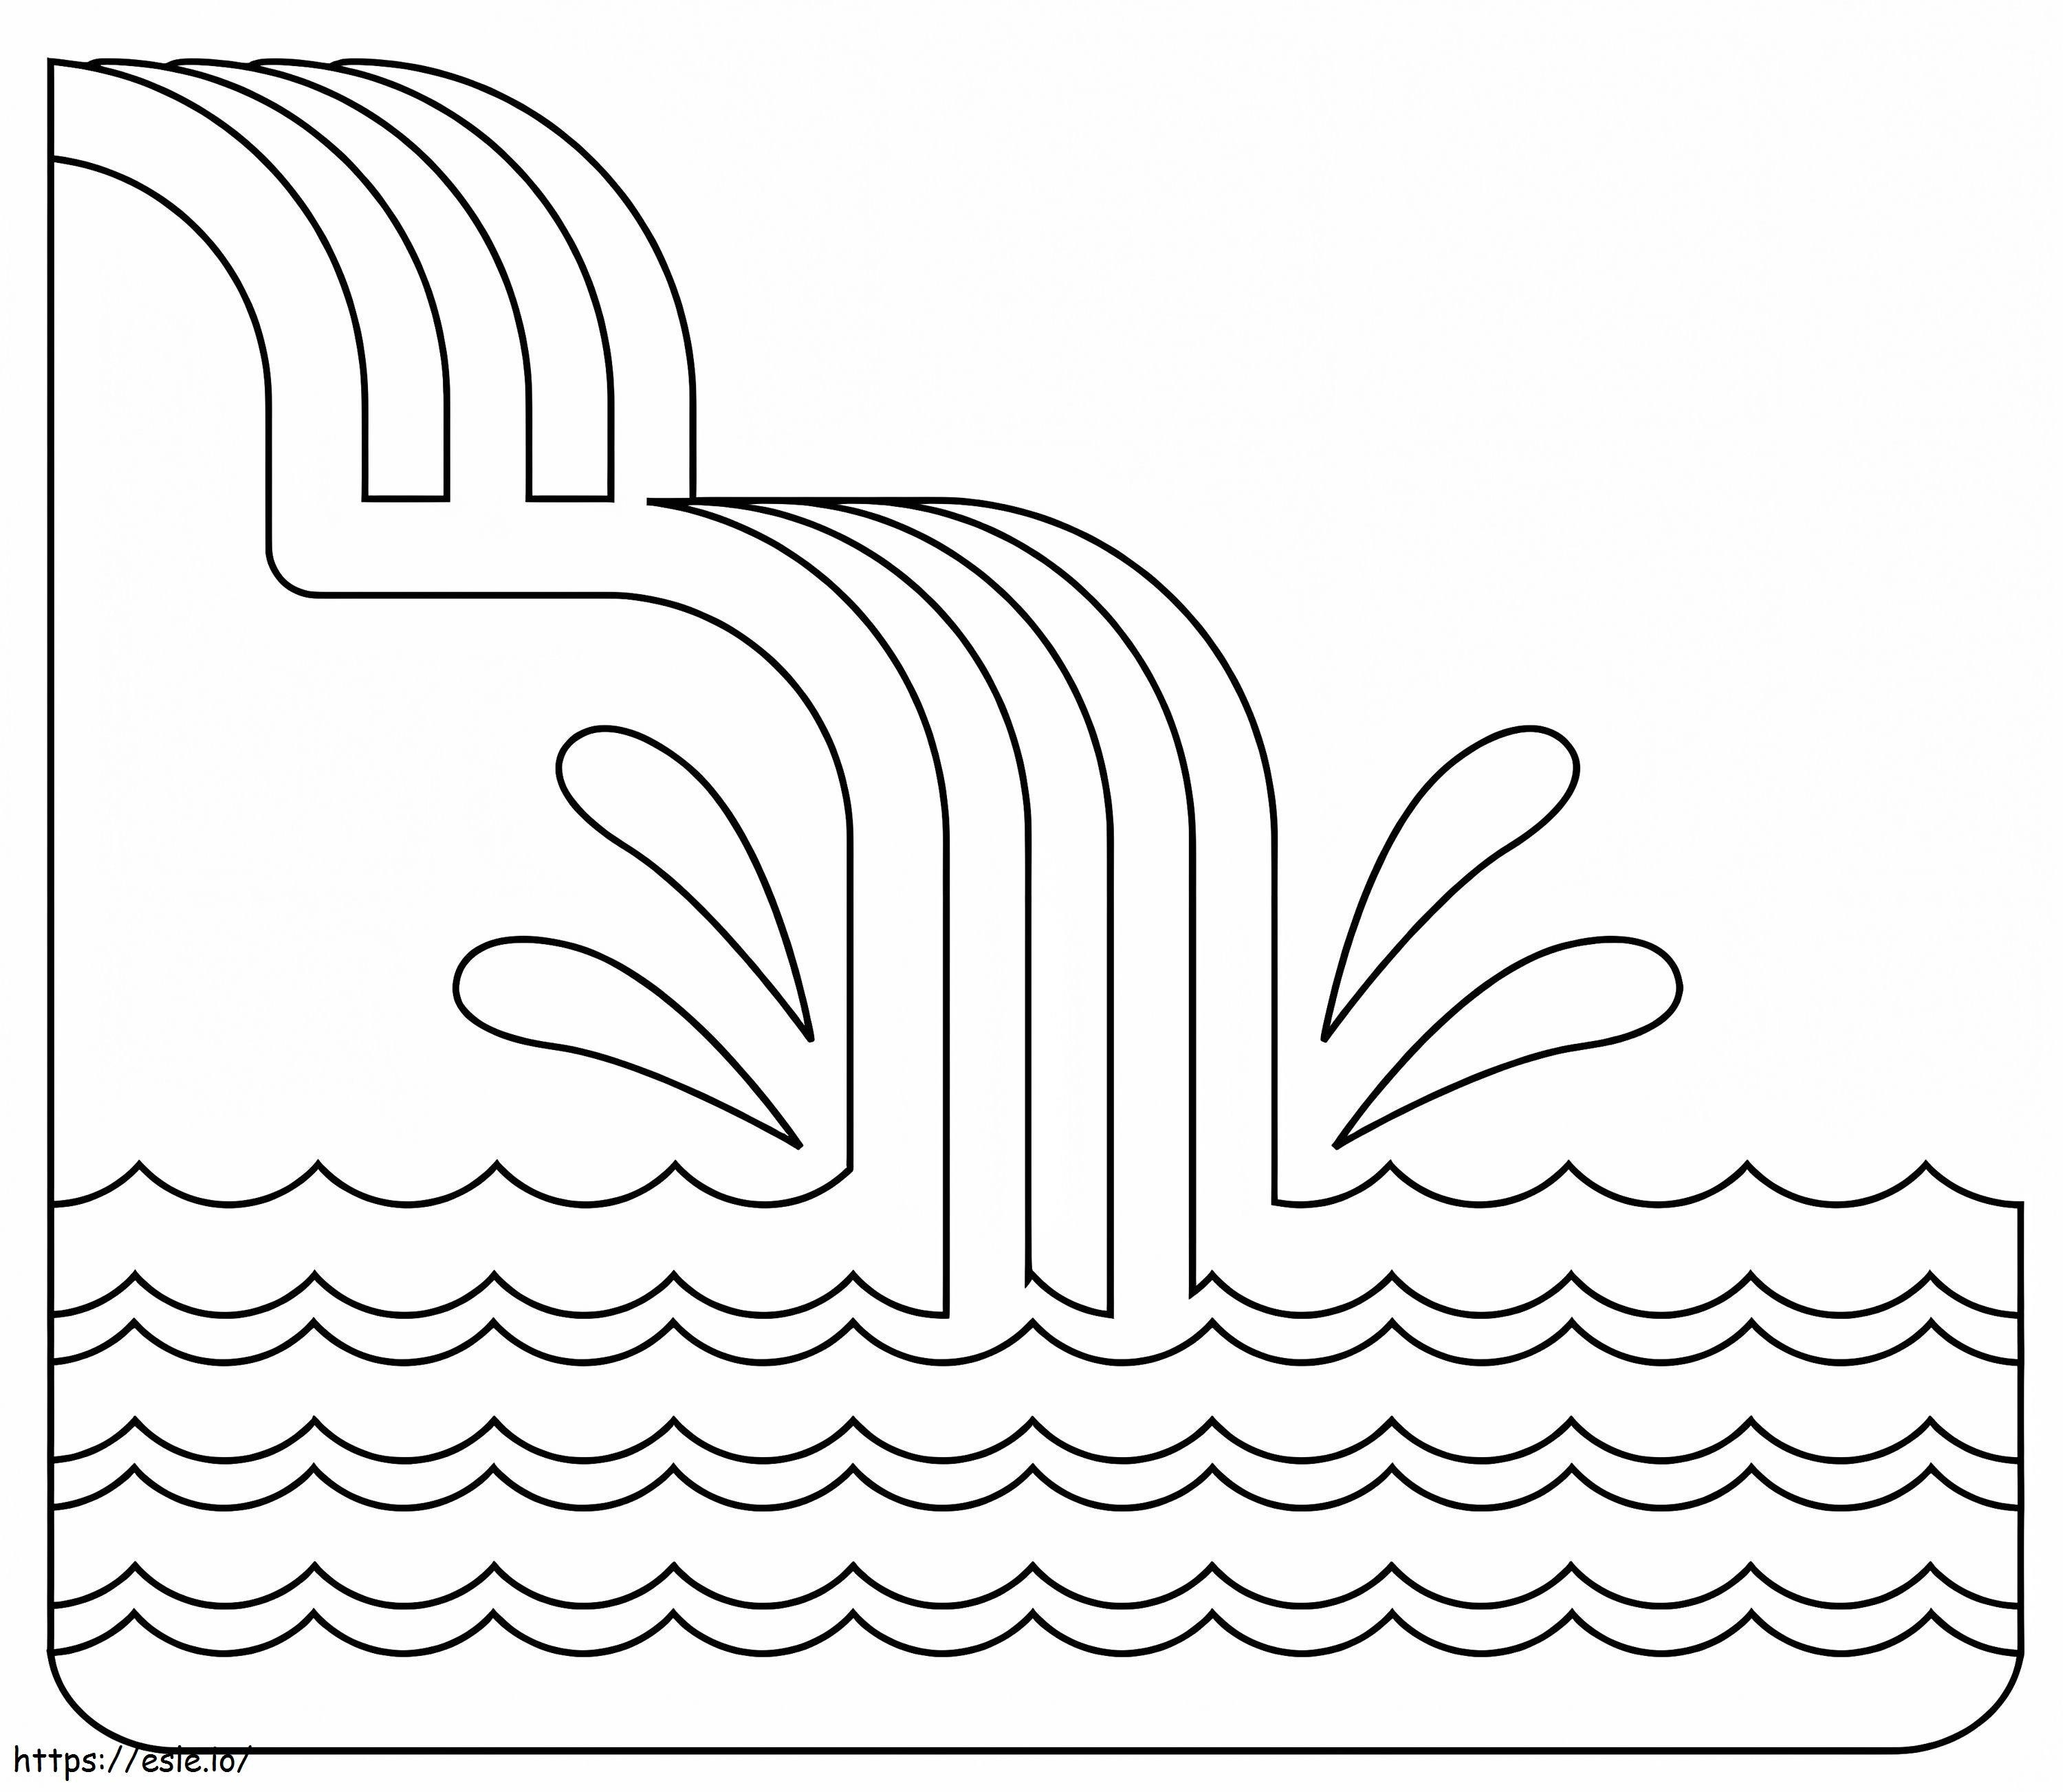 Waterfall 2 coloring page